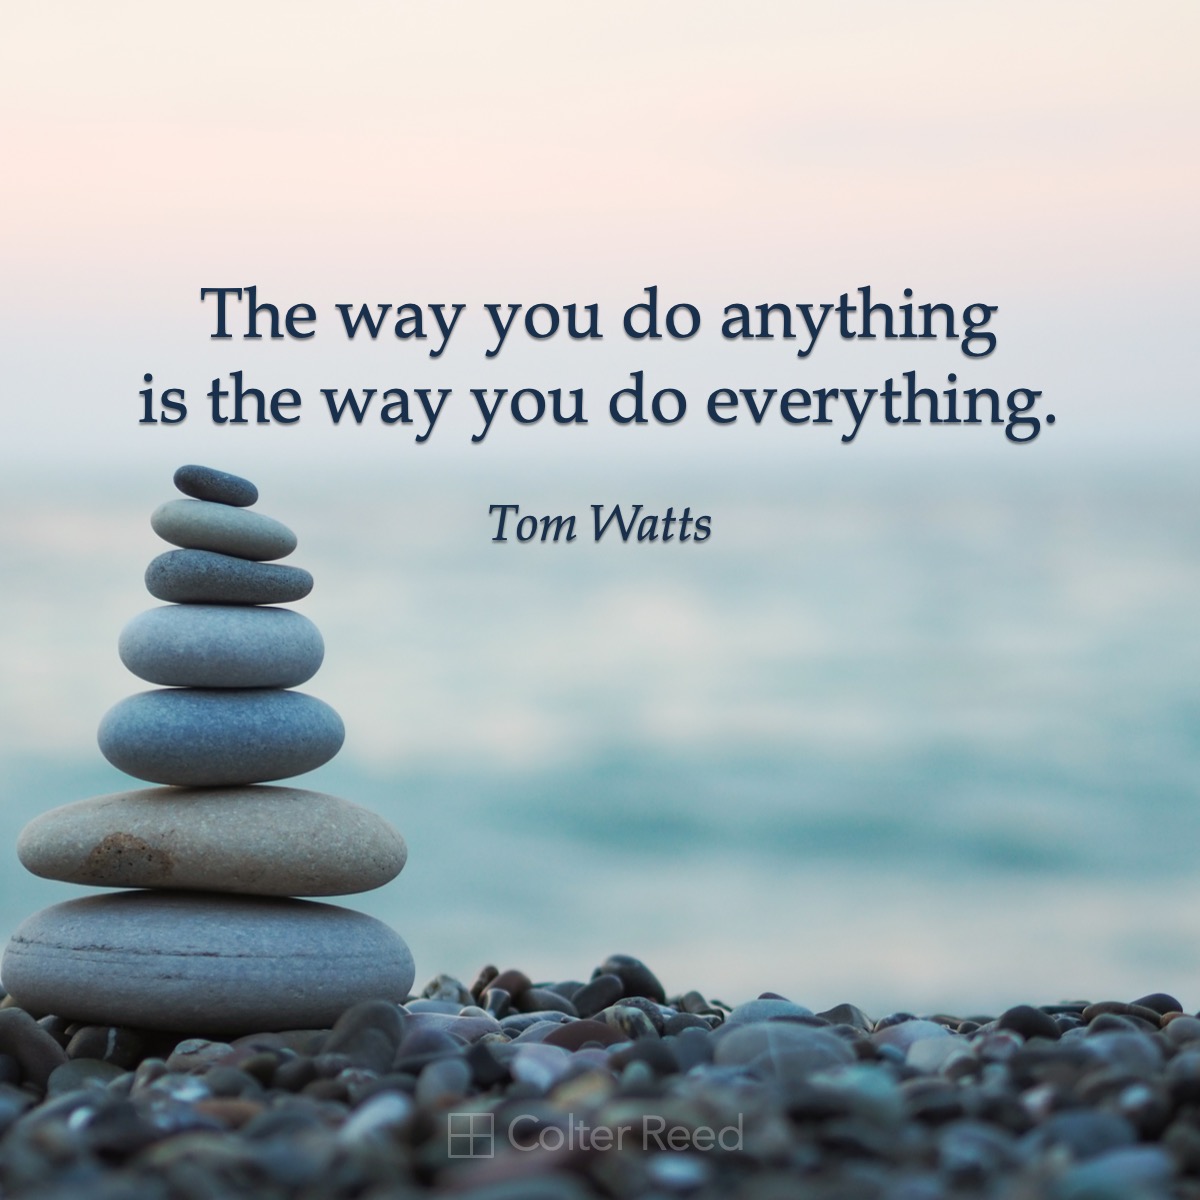 The way you do anything is the way you do everything. —Tom Watts